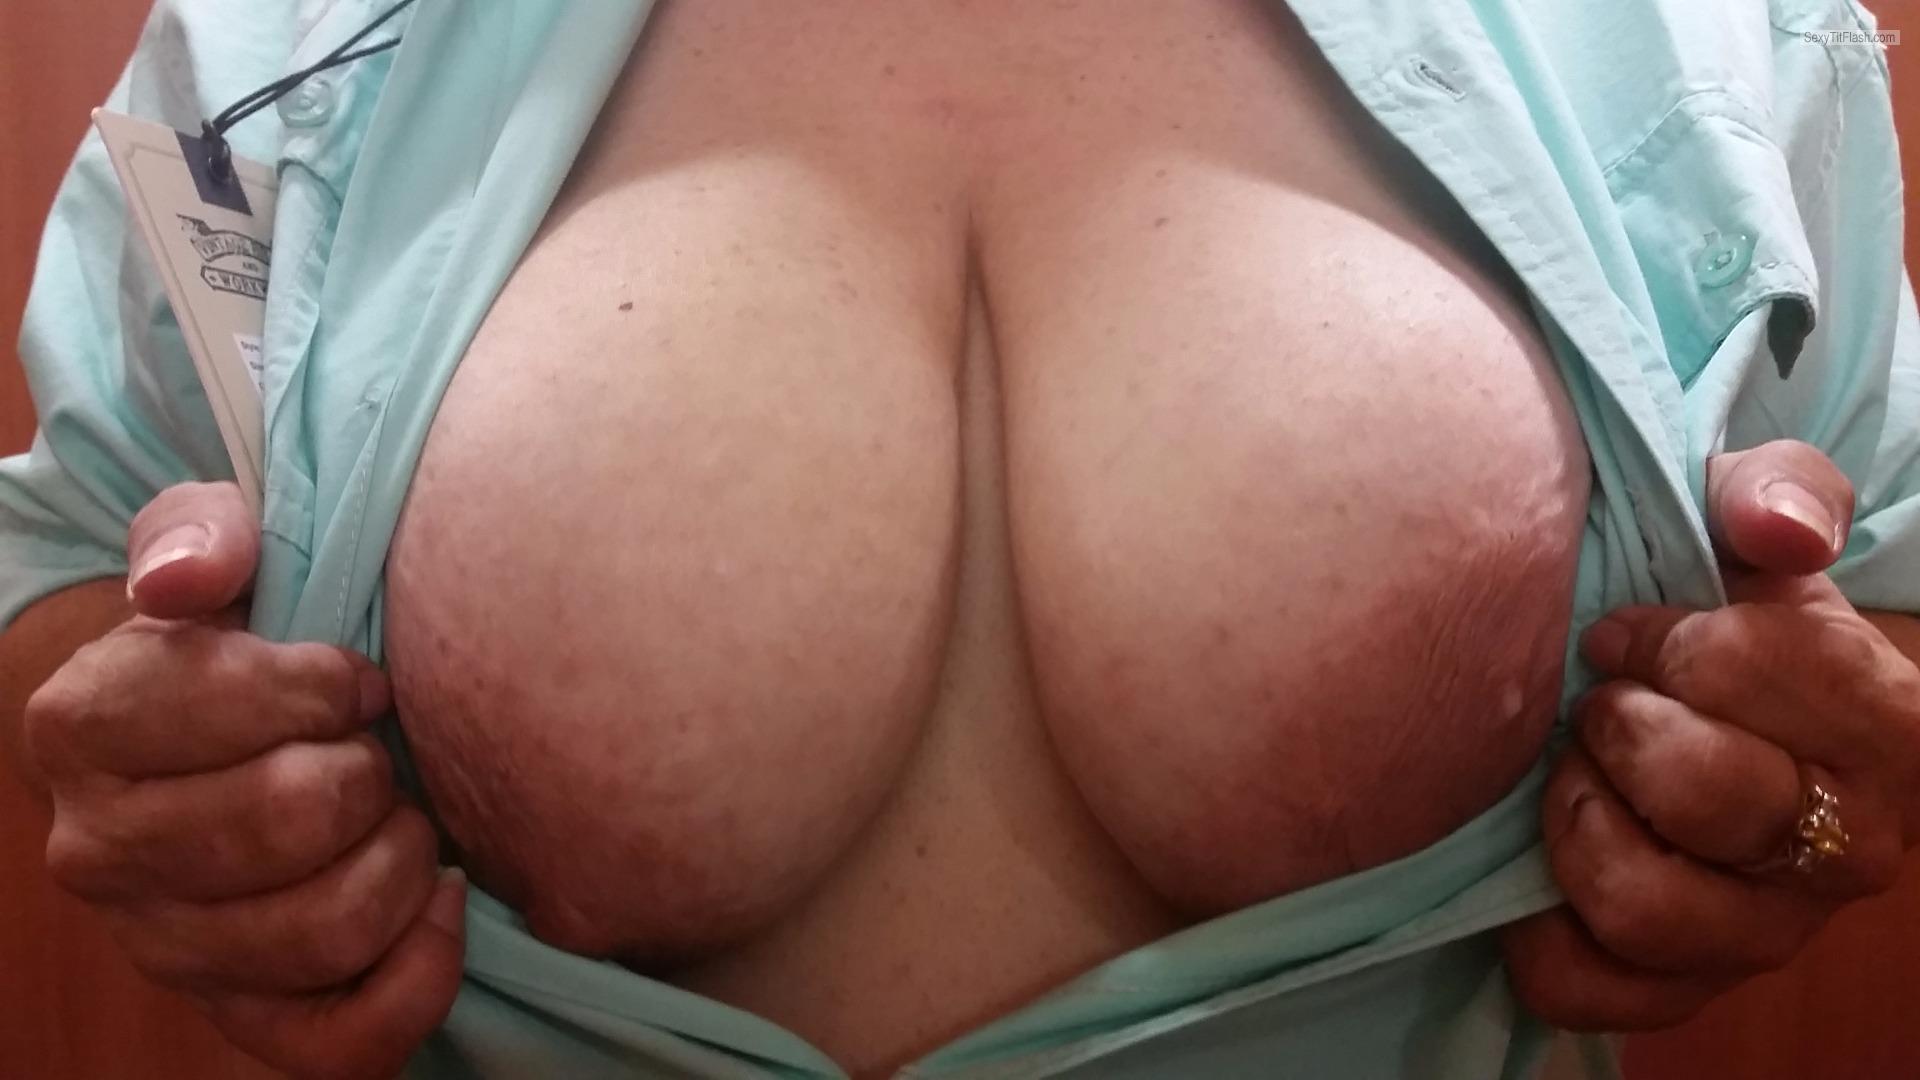 Tit Flash: My Friend's Big Tits - Bustyandtasty from United States